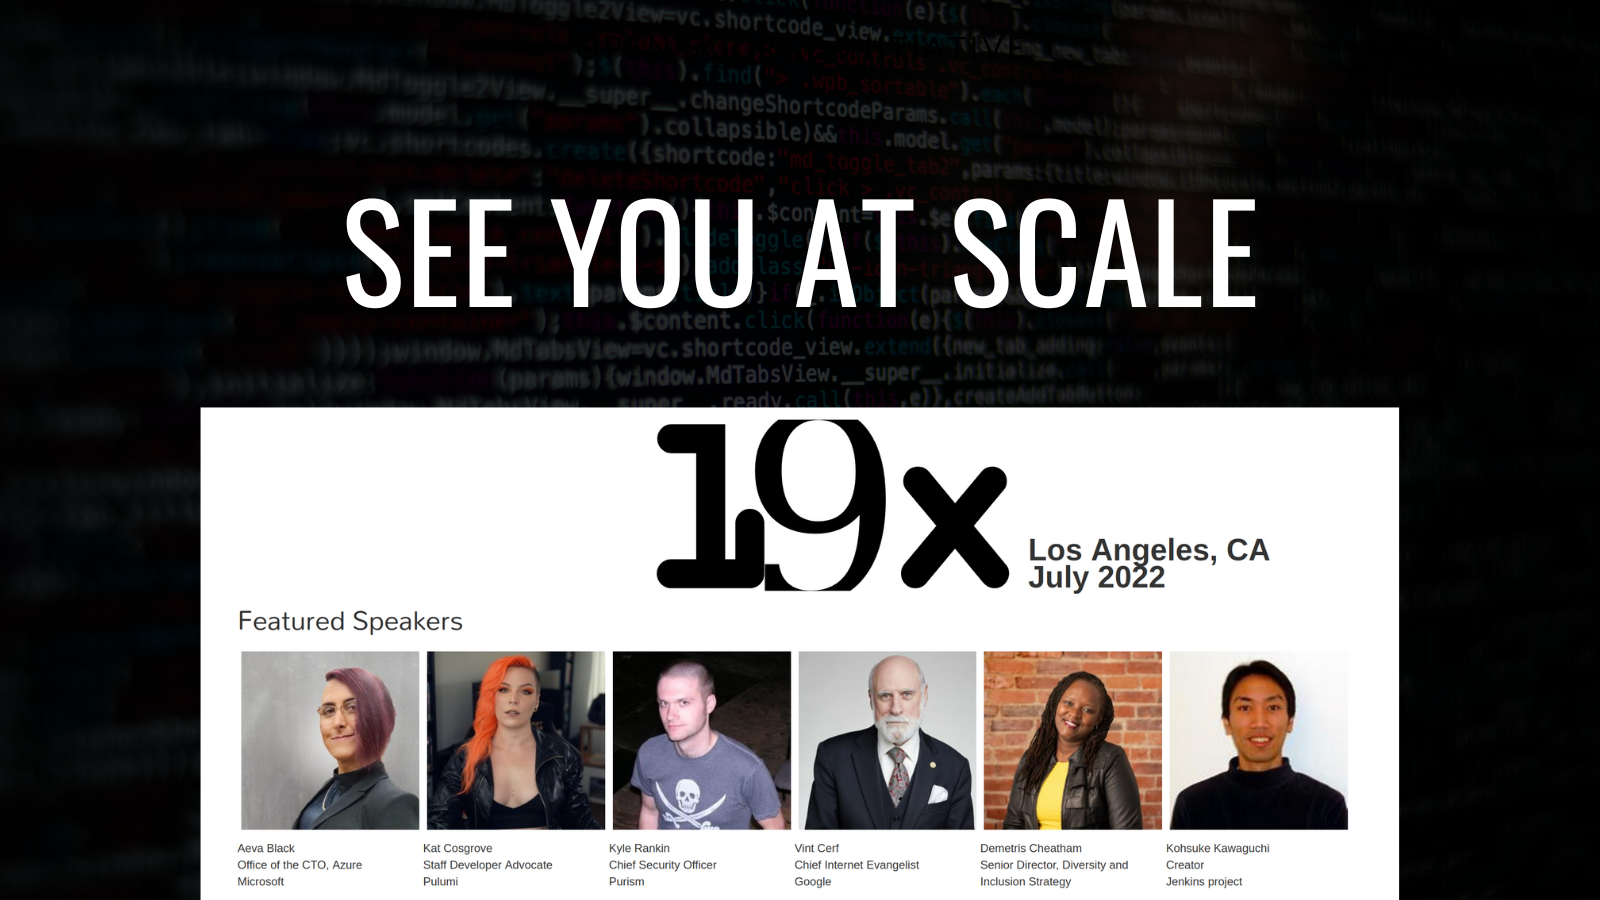 OSI to attend SCaLE 19x conference